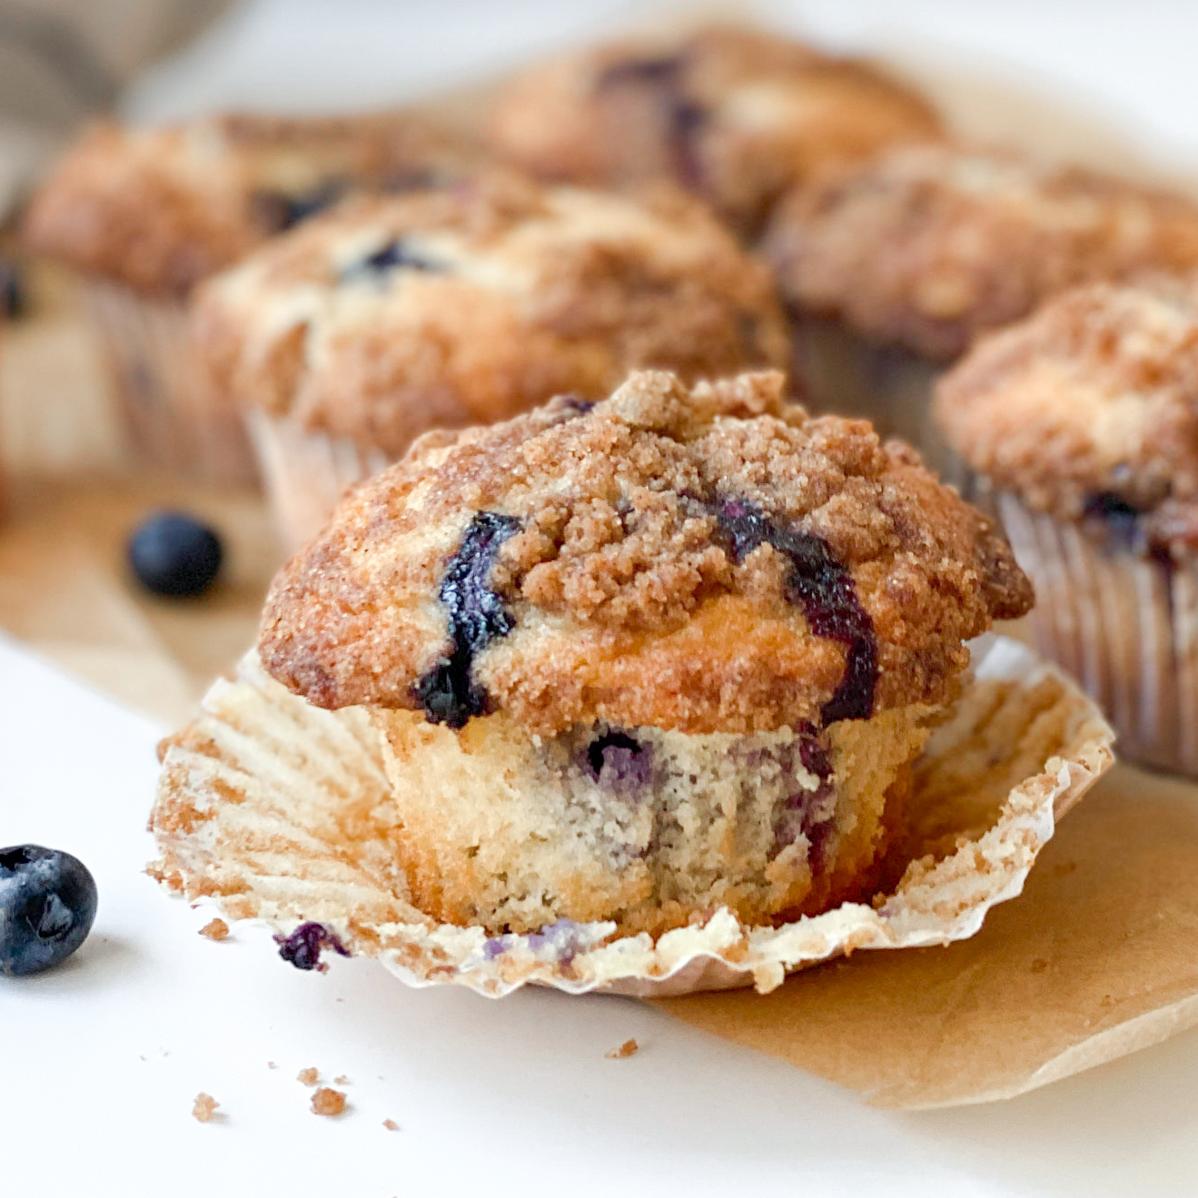  Nothing compares to warm, freshly-baked Blueberry Coffee Cake Muffins on a lazy weekend morning.